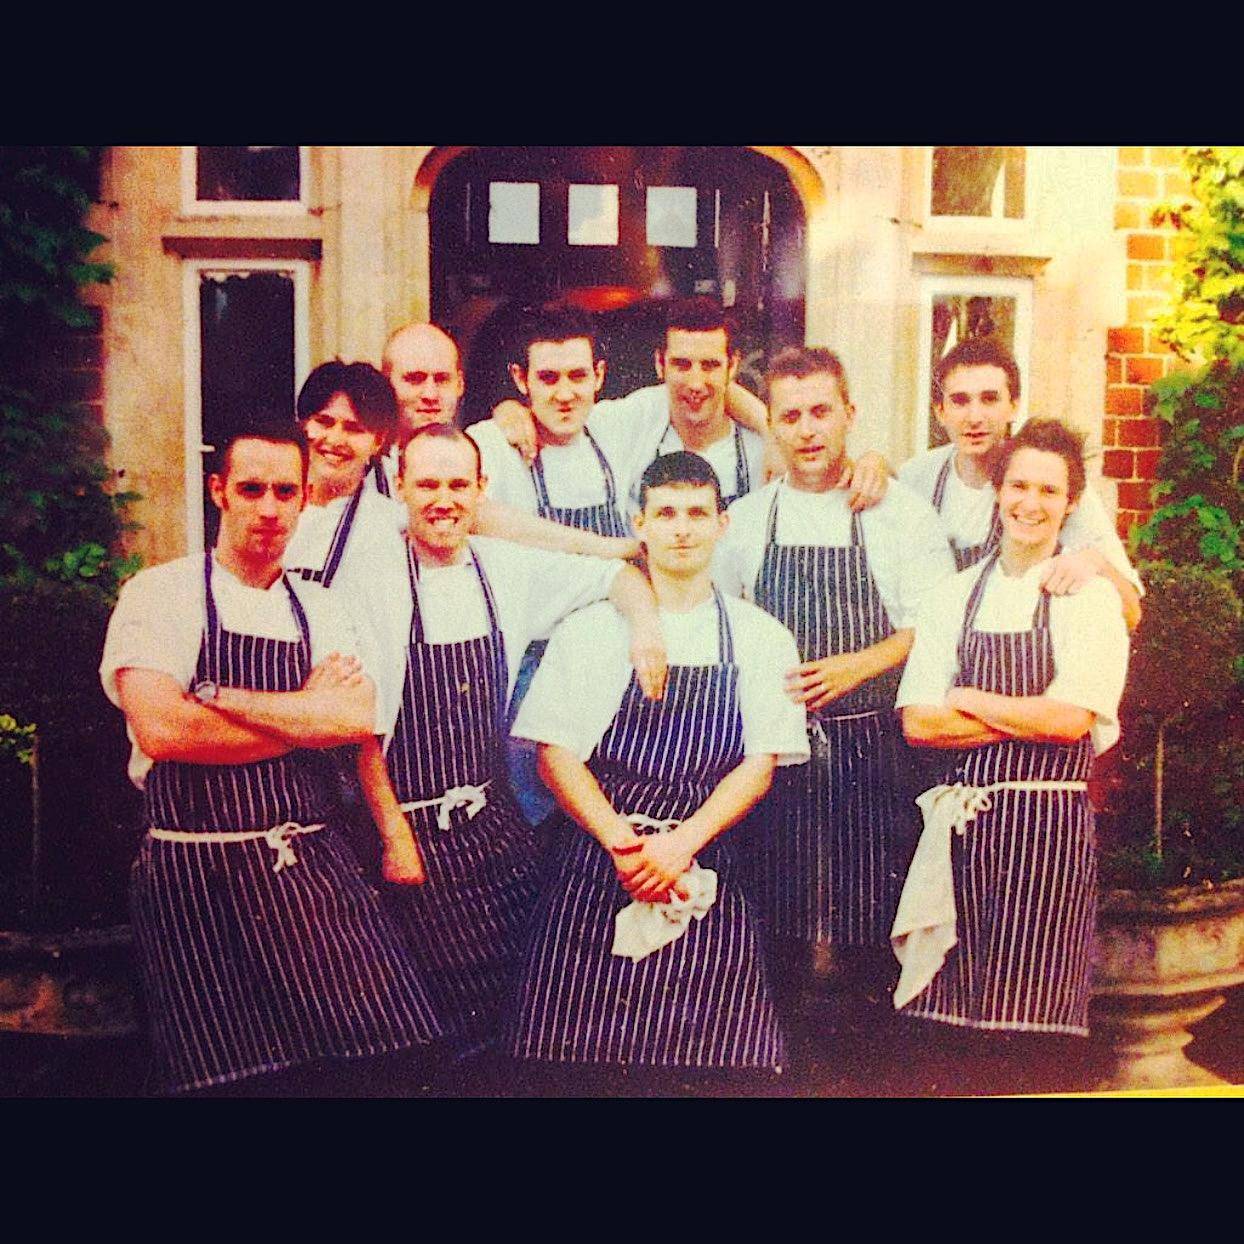 Chris with the team of at L'Ortolan